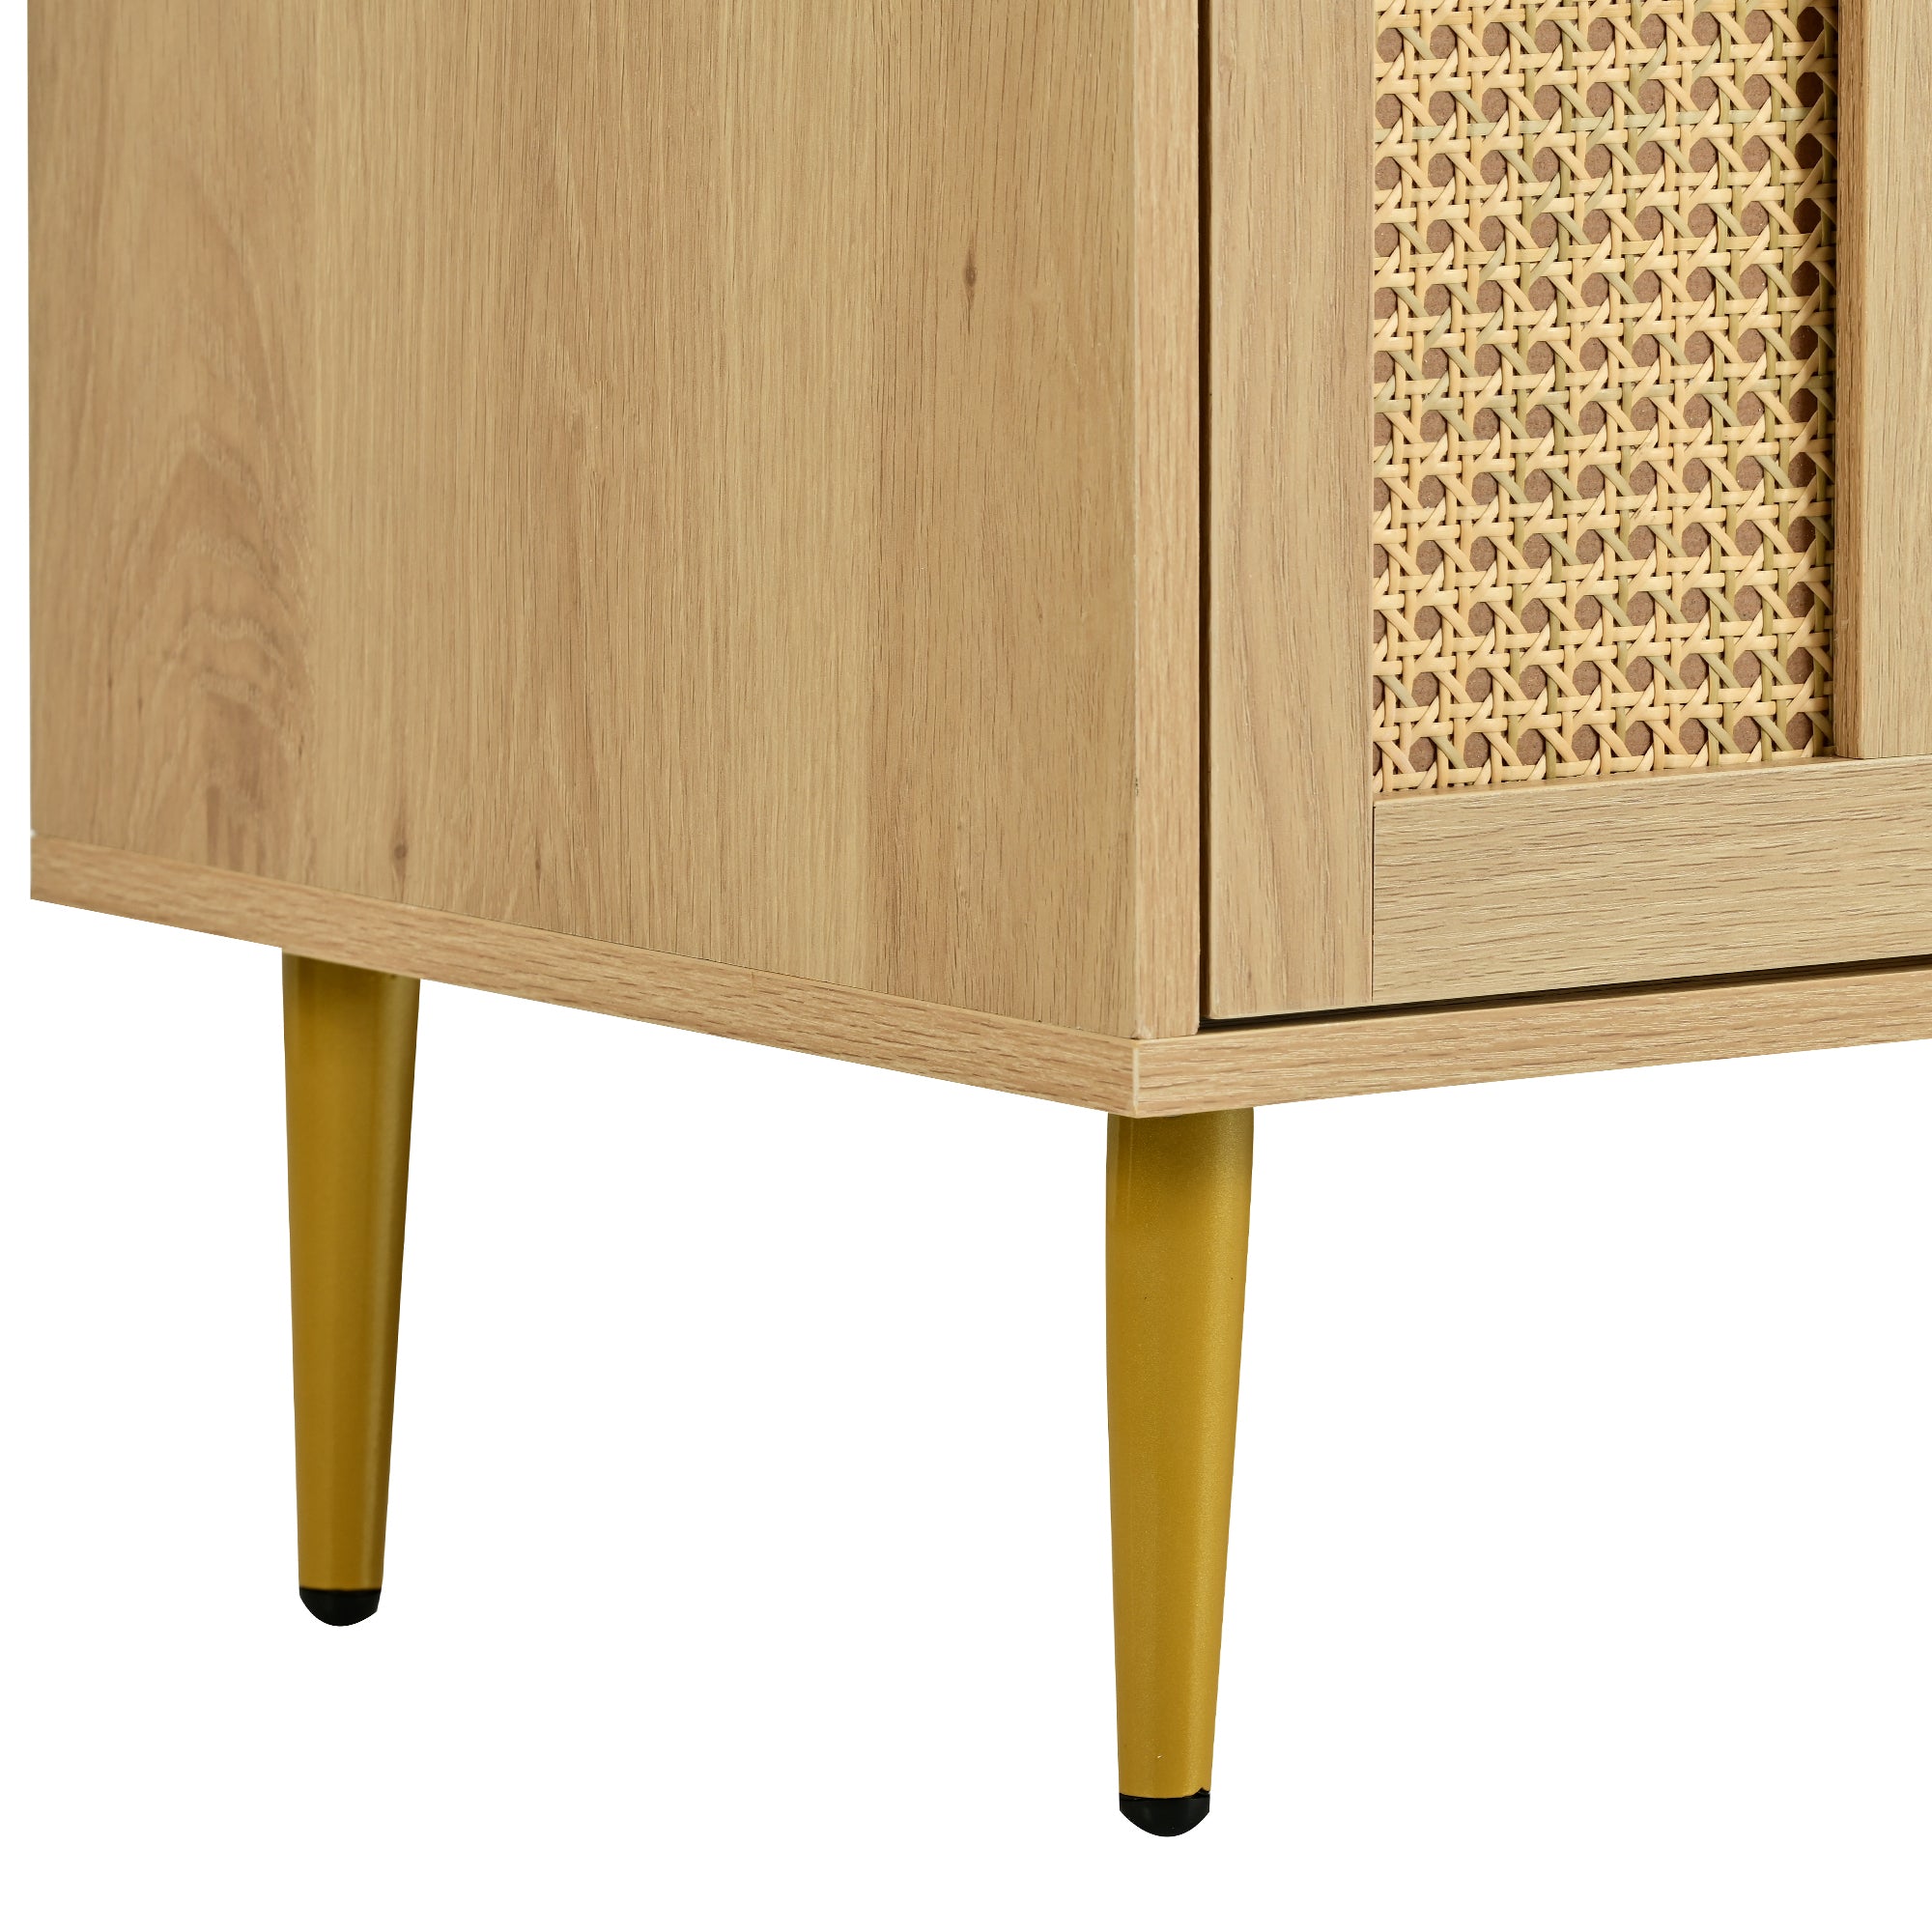 Rattan Cabinet with Adjustable Shelves and Storage